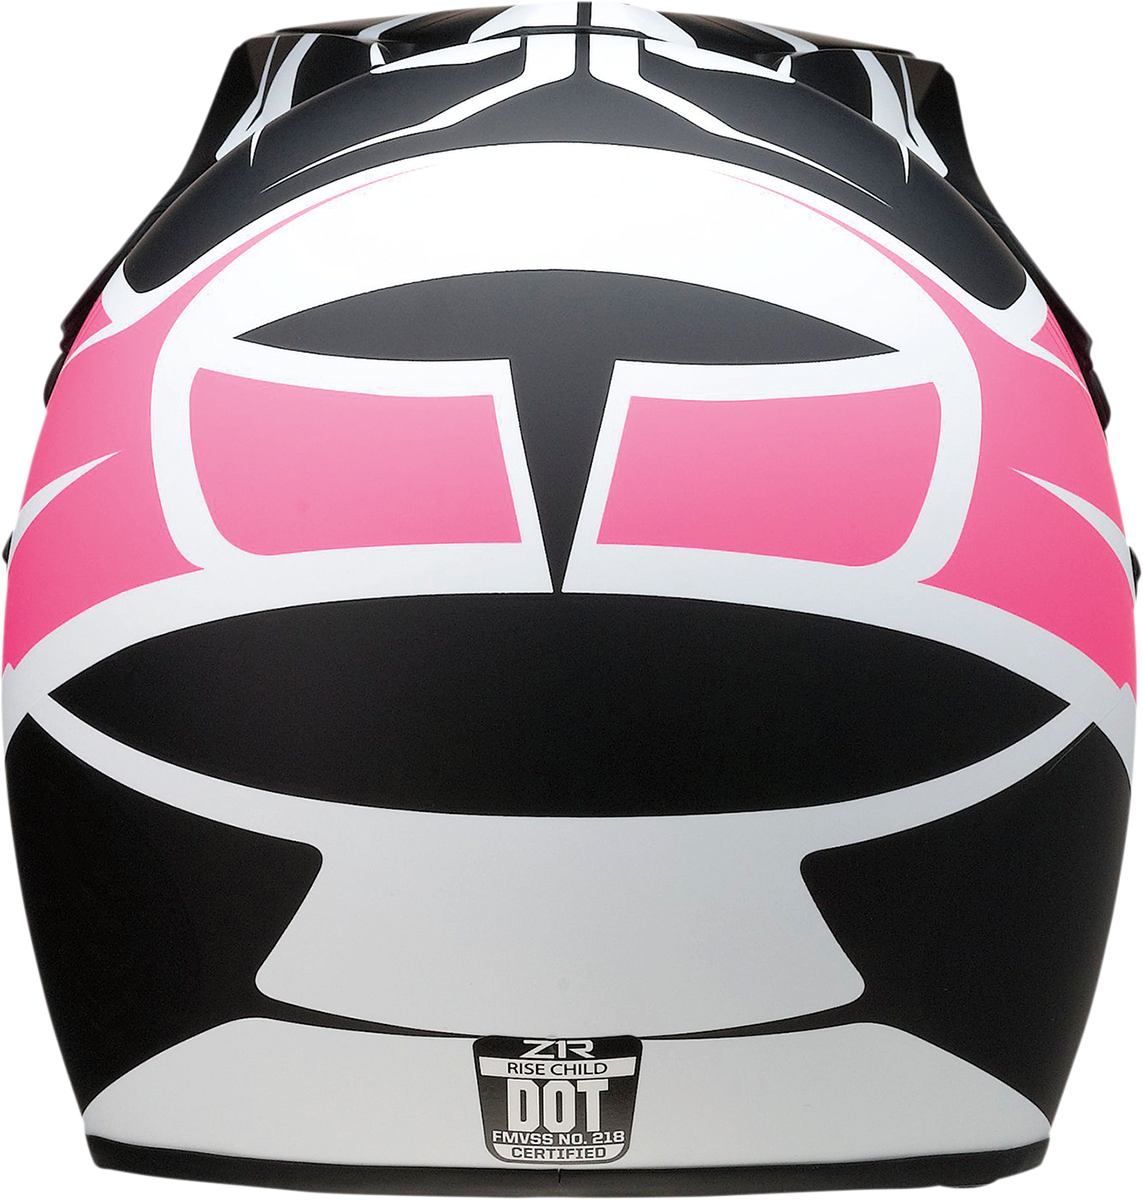 Z1R Child Rise Helmet - Flame - Pink - S/M 0111-1437